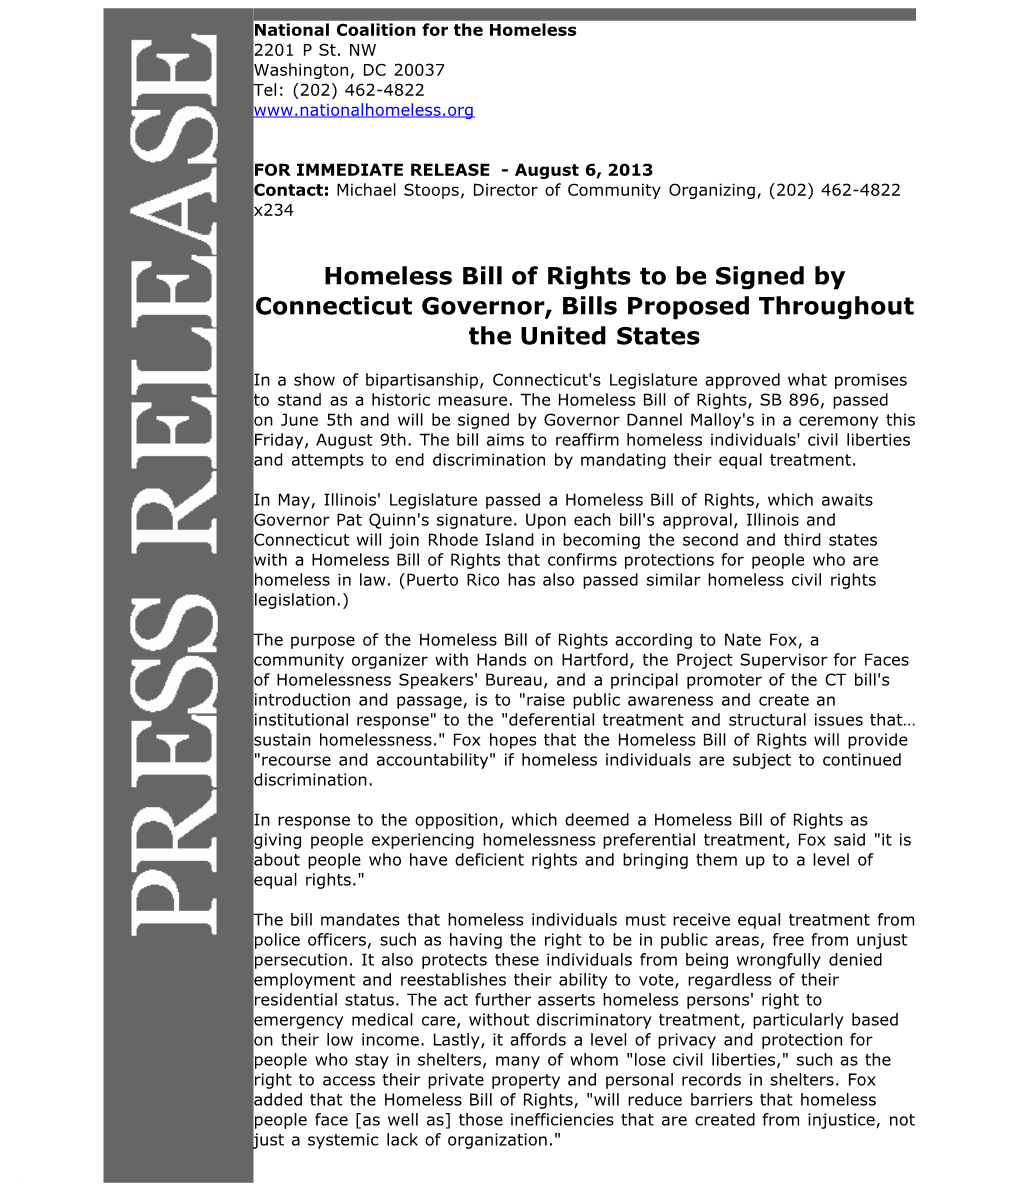 Homeless Bills of Rights Proposed Throughout the US